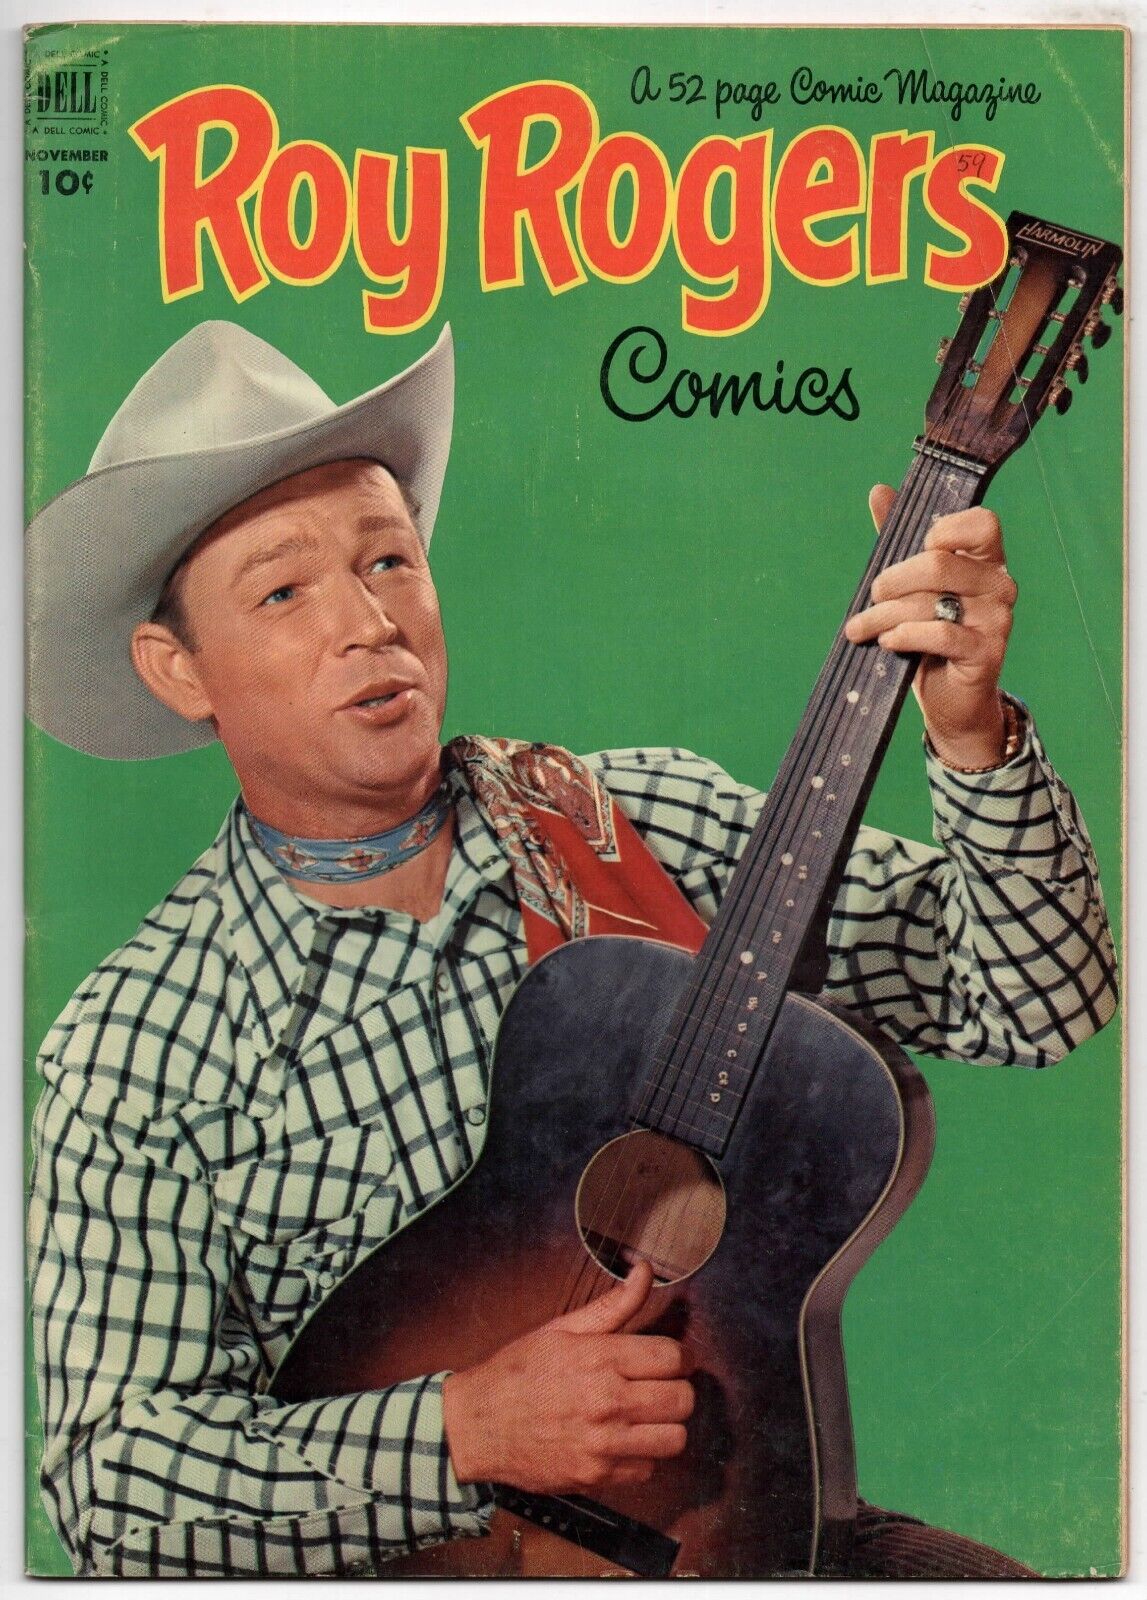 Roy Rogers Comics #59 Dell Western November 1952 Photo cover playing guitar NICE